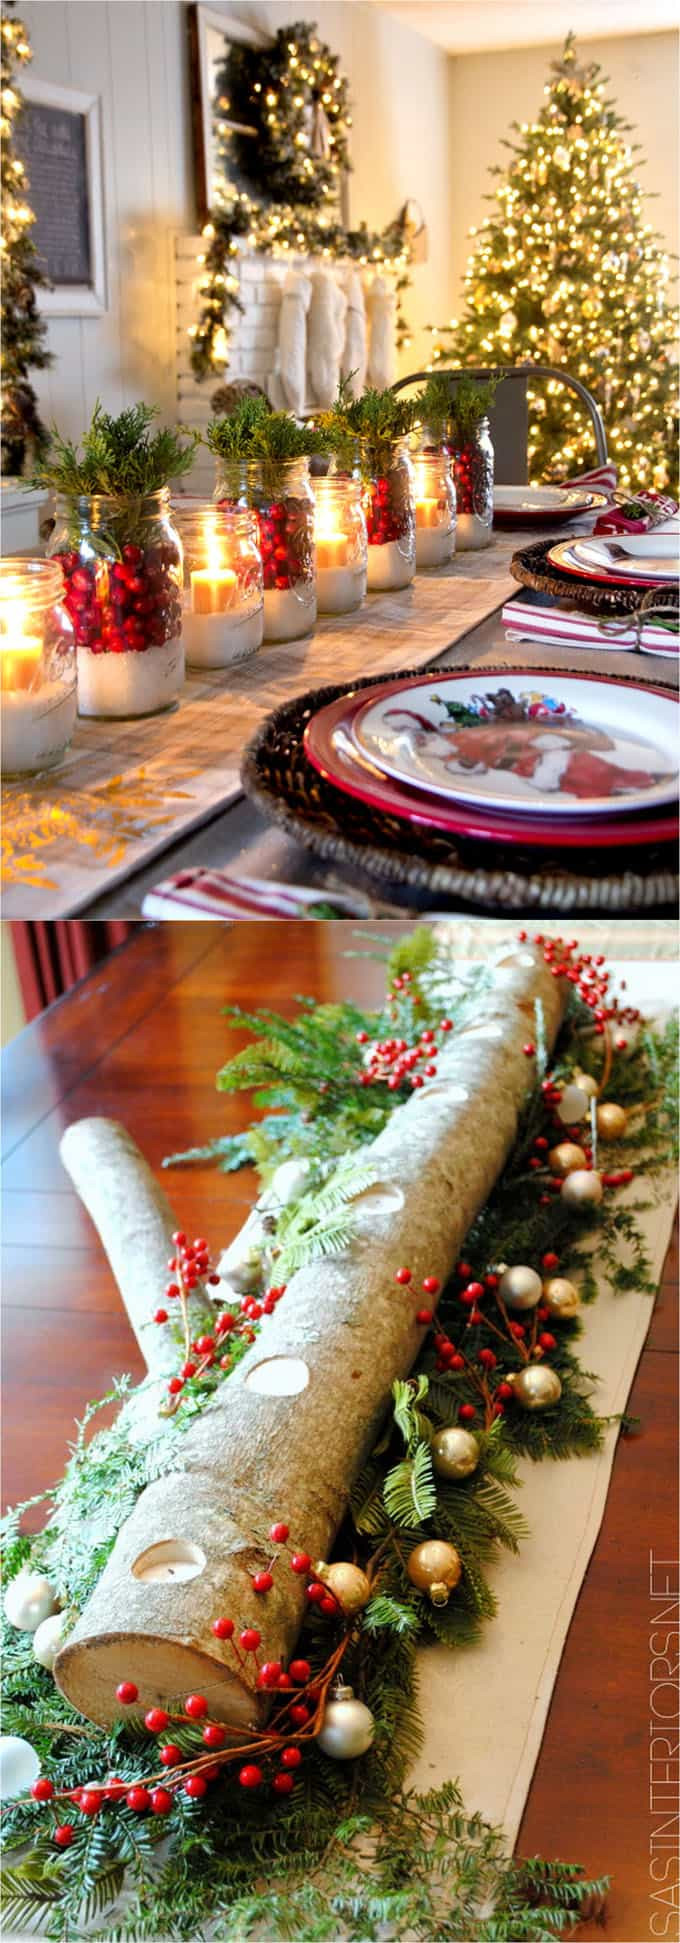 Simple Christmas Table Decorations
 27 Gorgeous DIY Thanksgiving & Christmas Table Decorations